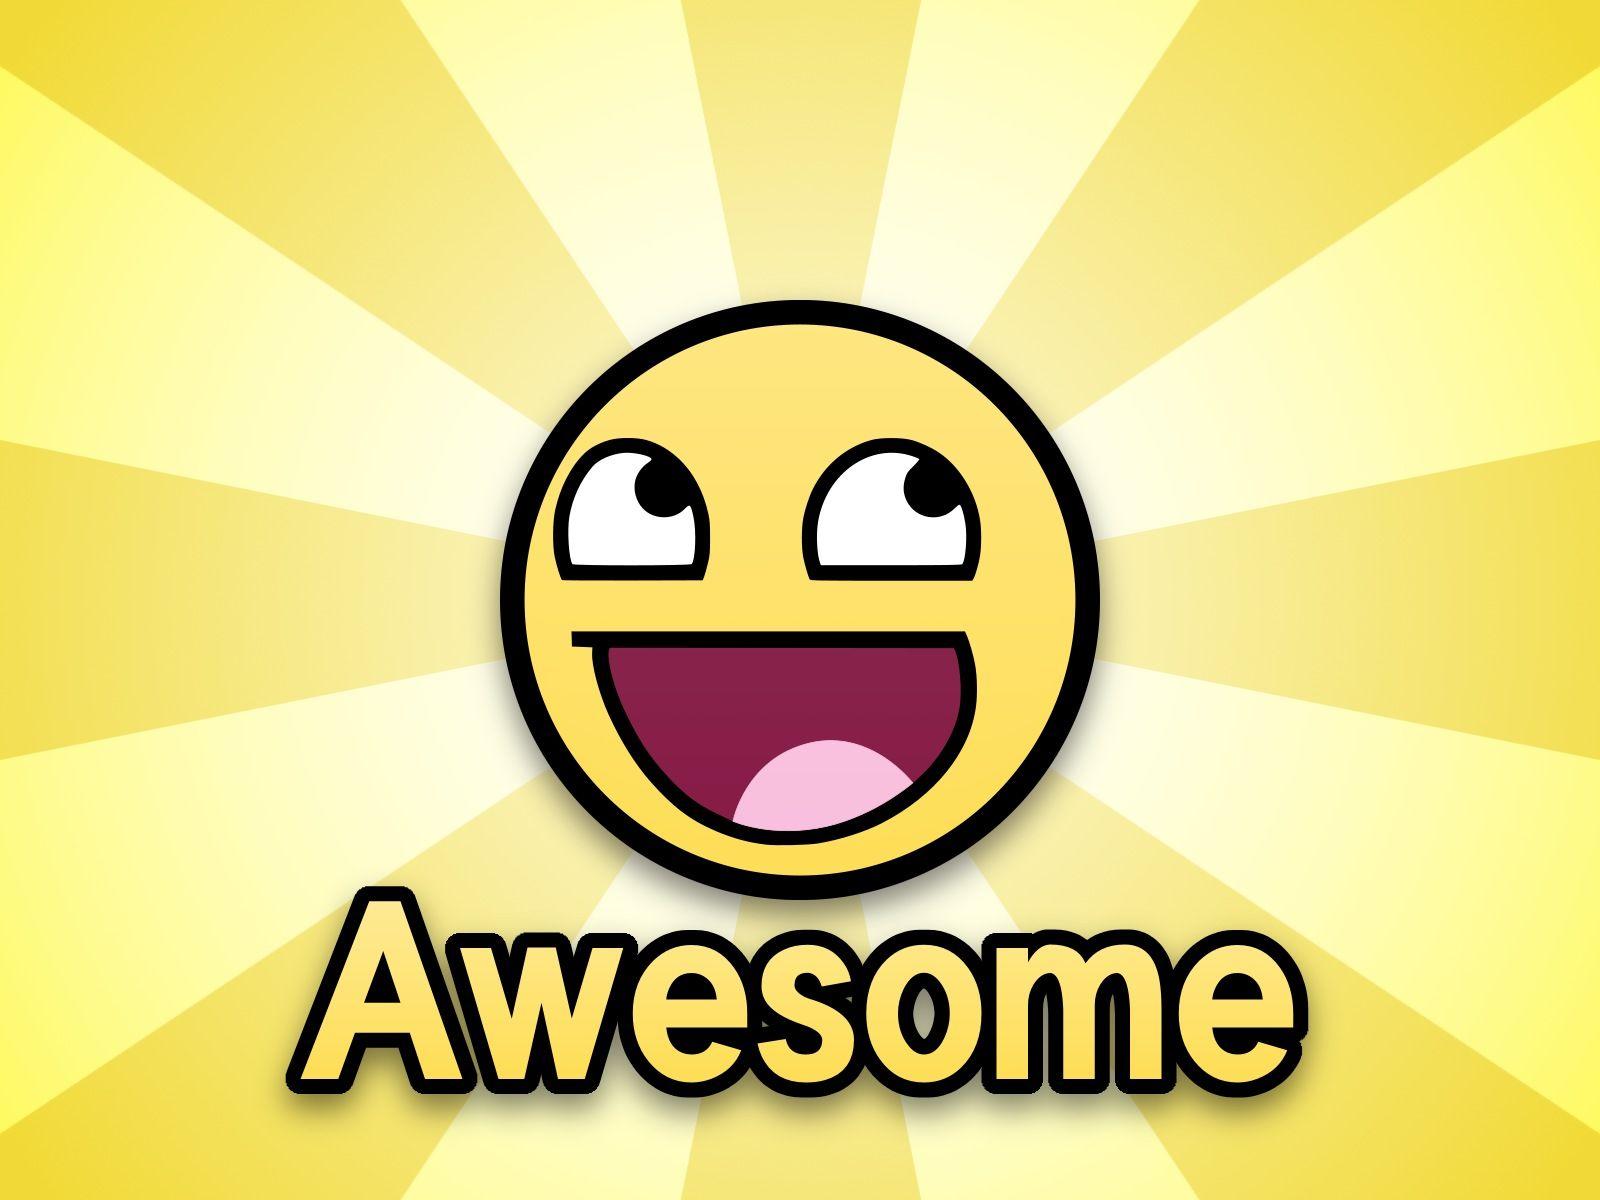 Epic Smiley Wallpaper Collection 1600x1200PX Wallpaper Funny